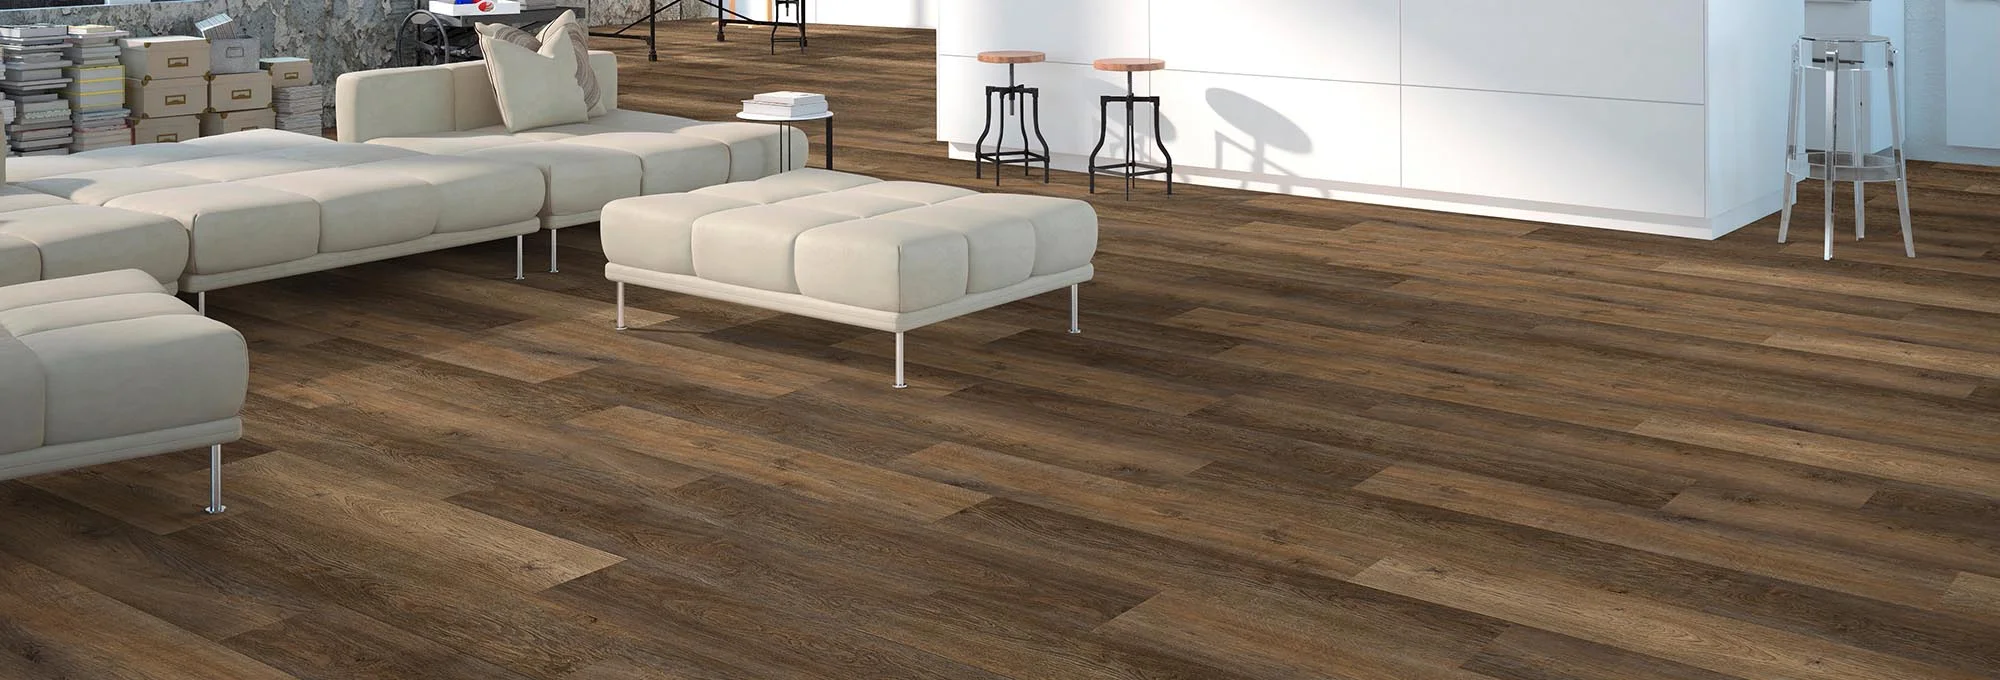 Shop Flooring Products from Thompson Interiors in Lake Odessa